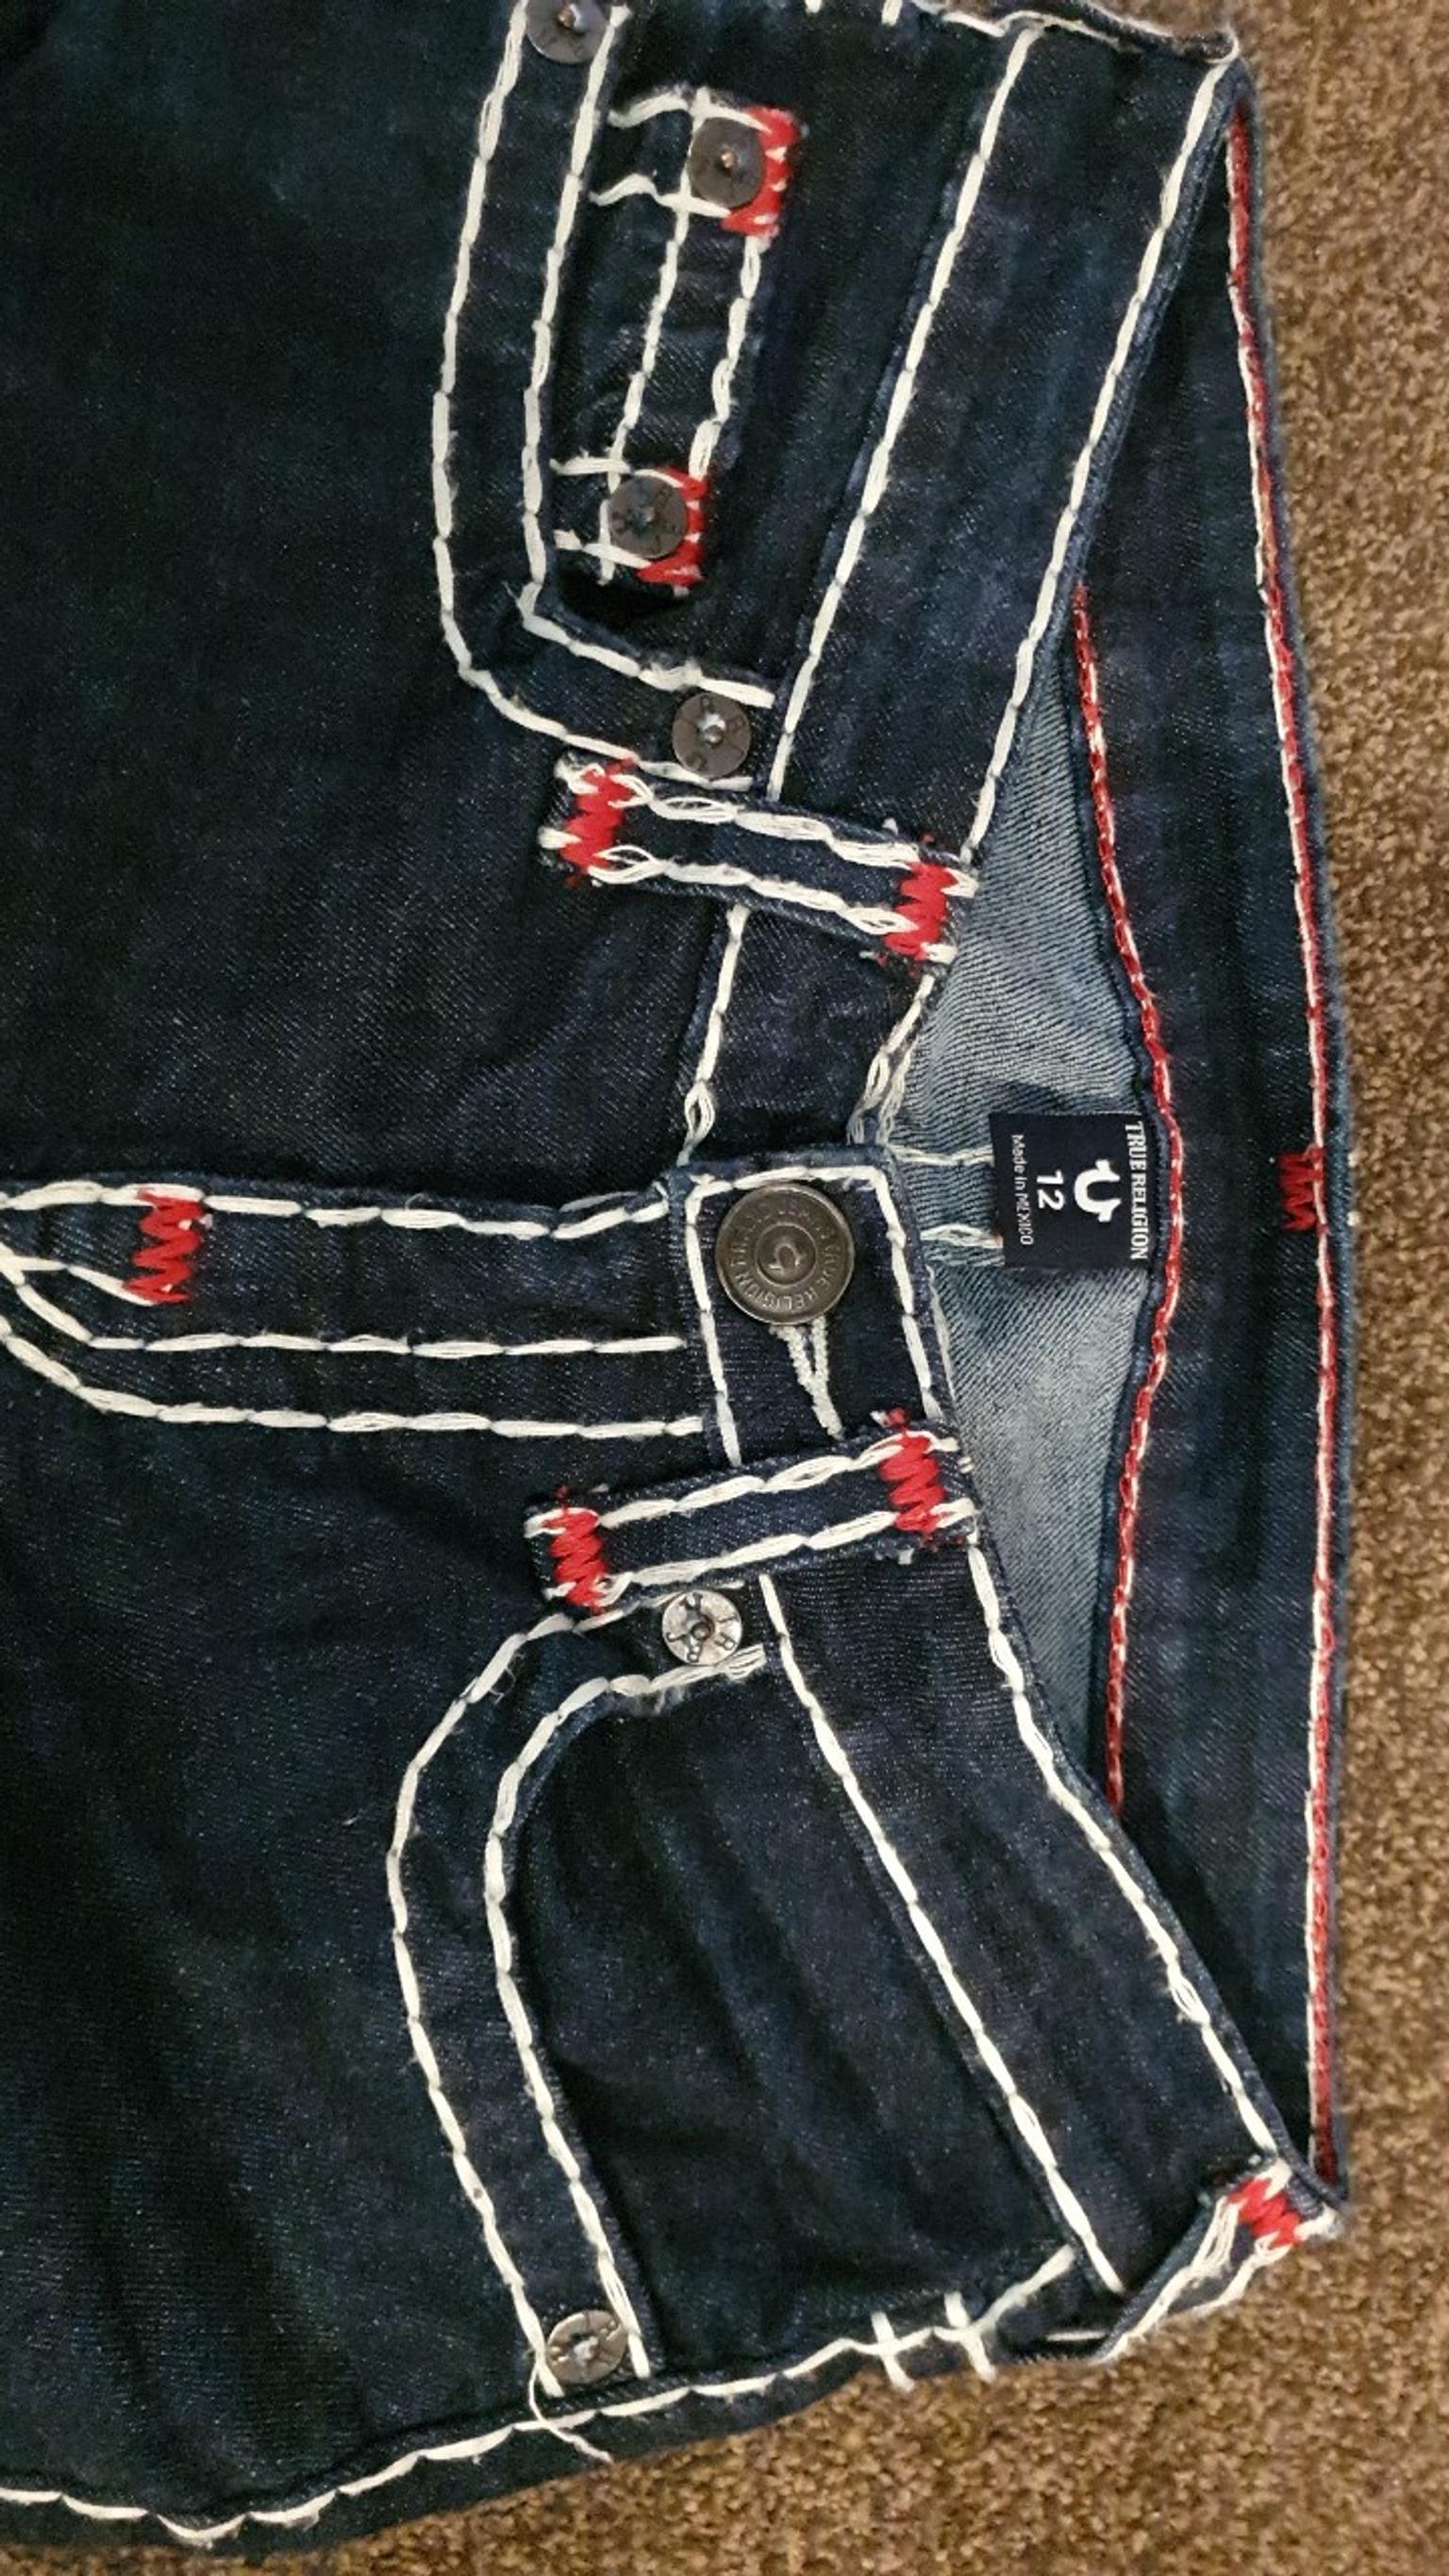 tr jeans